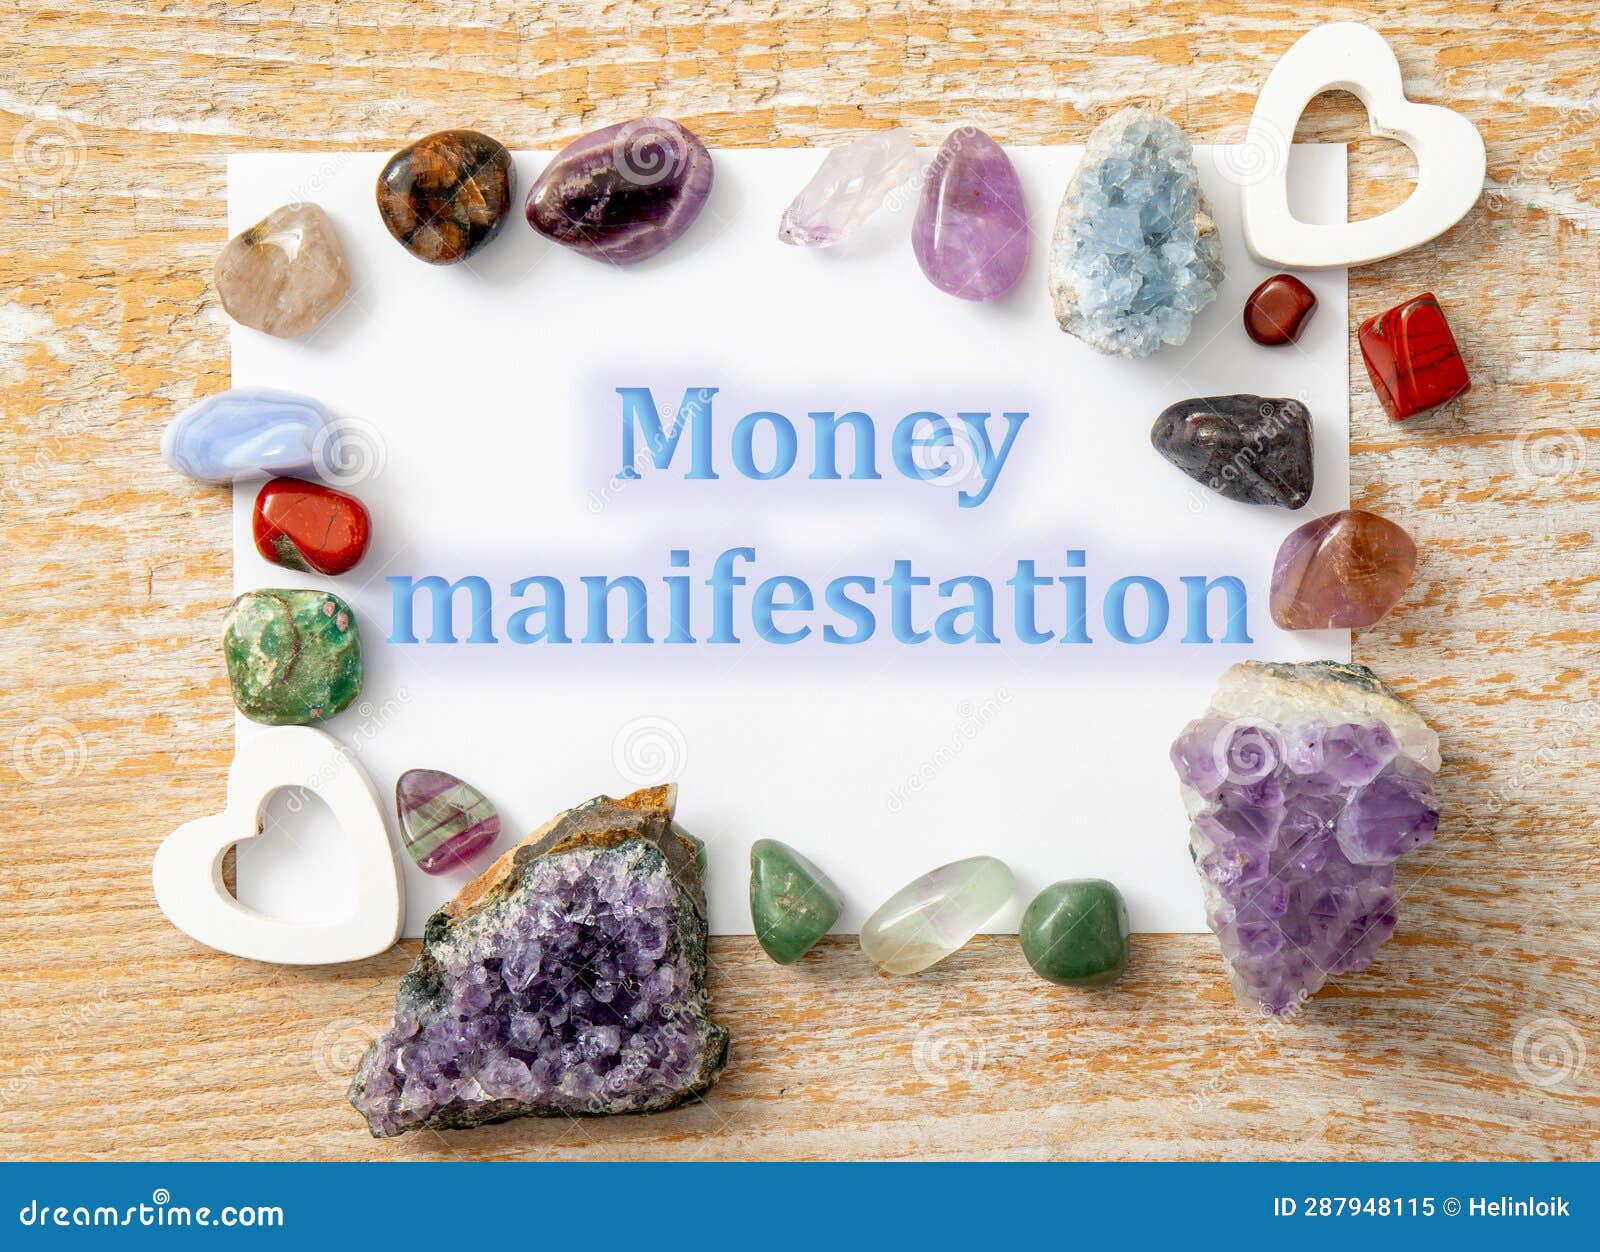 10 Ideas About Wealth Manifestation That Really Work